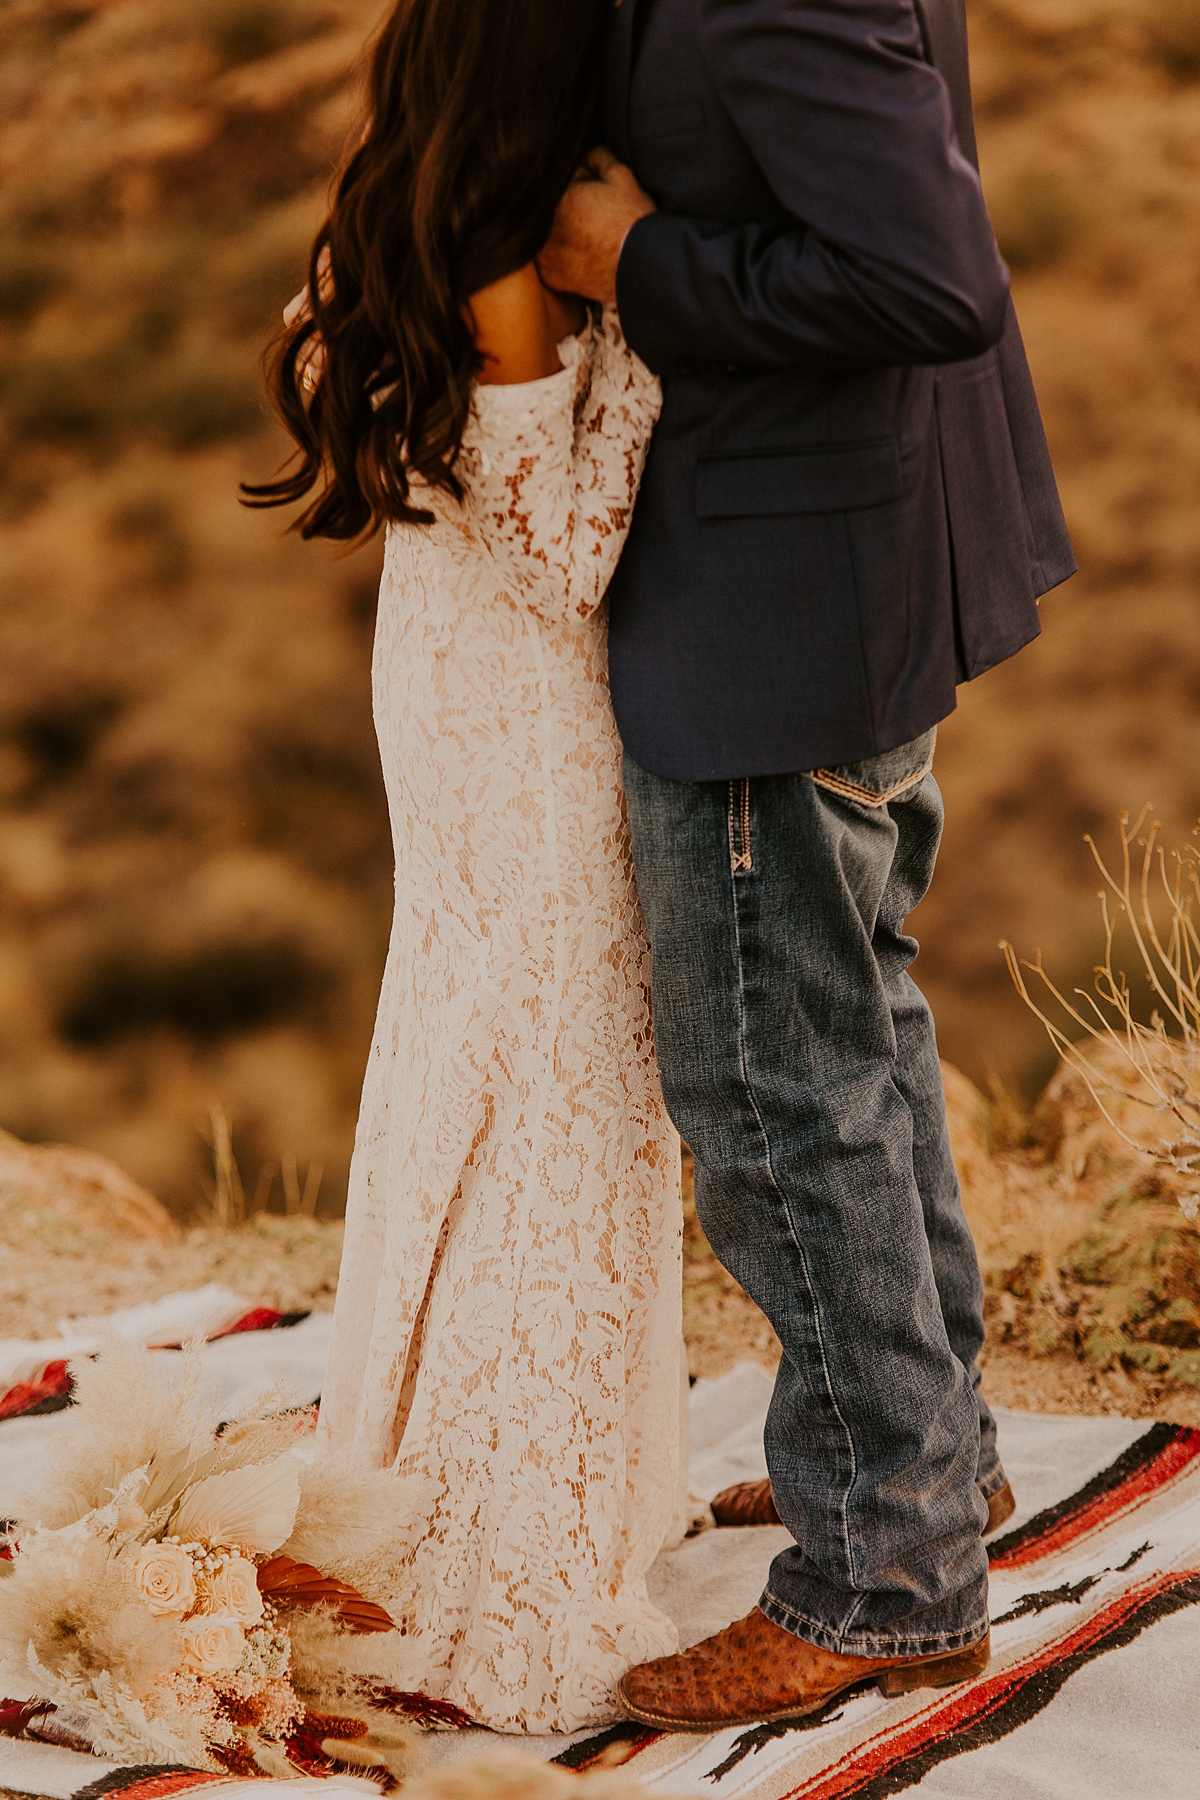 Intimate-elopement-in-superstition-mountain-wilderness-allison-slater-photography68.jpg